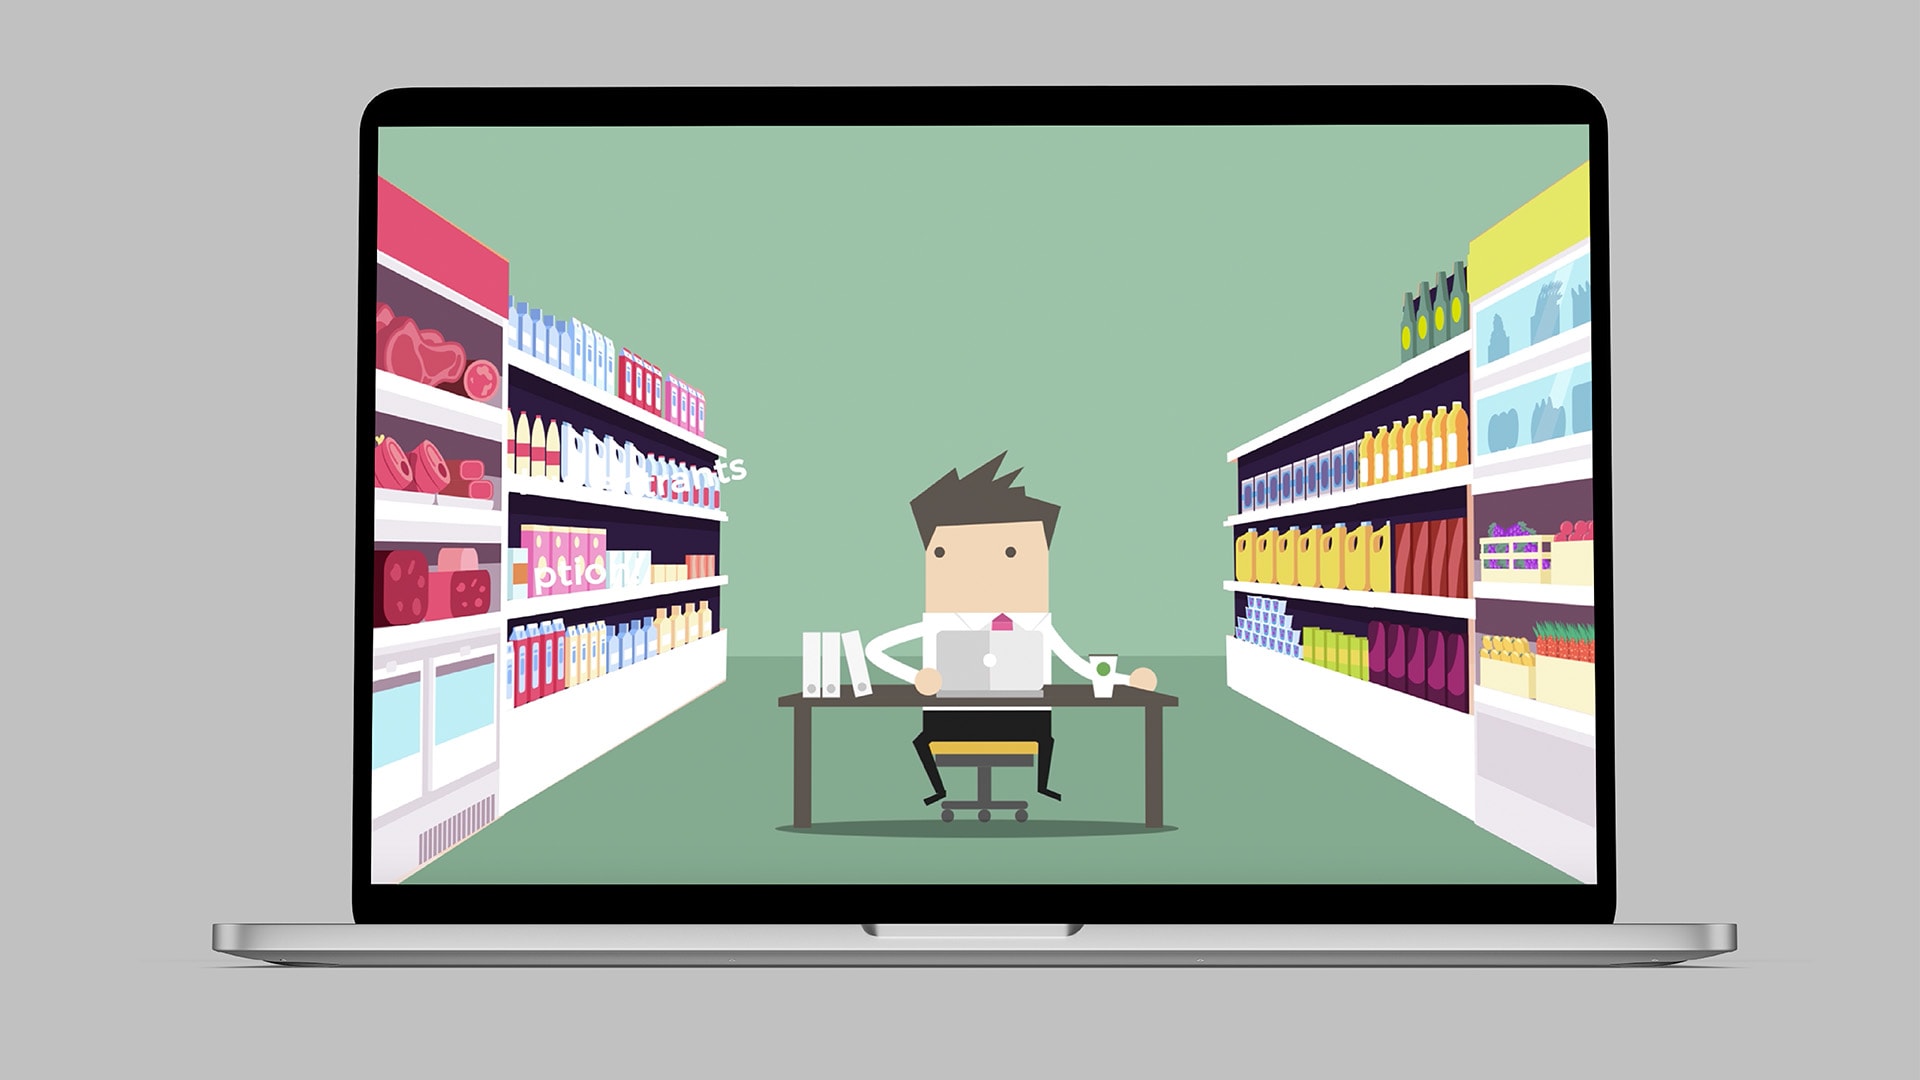 A laptop displaying the C-suite Pitch Pilot Brand Video Illustration showing a man sitting at a desk and looking to the right, in a supermarket aisle